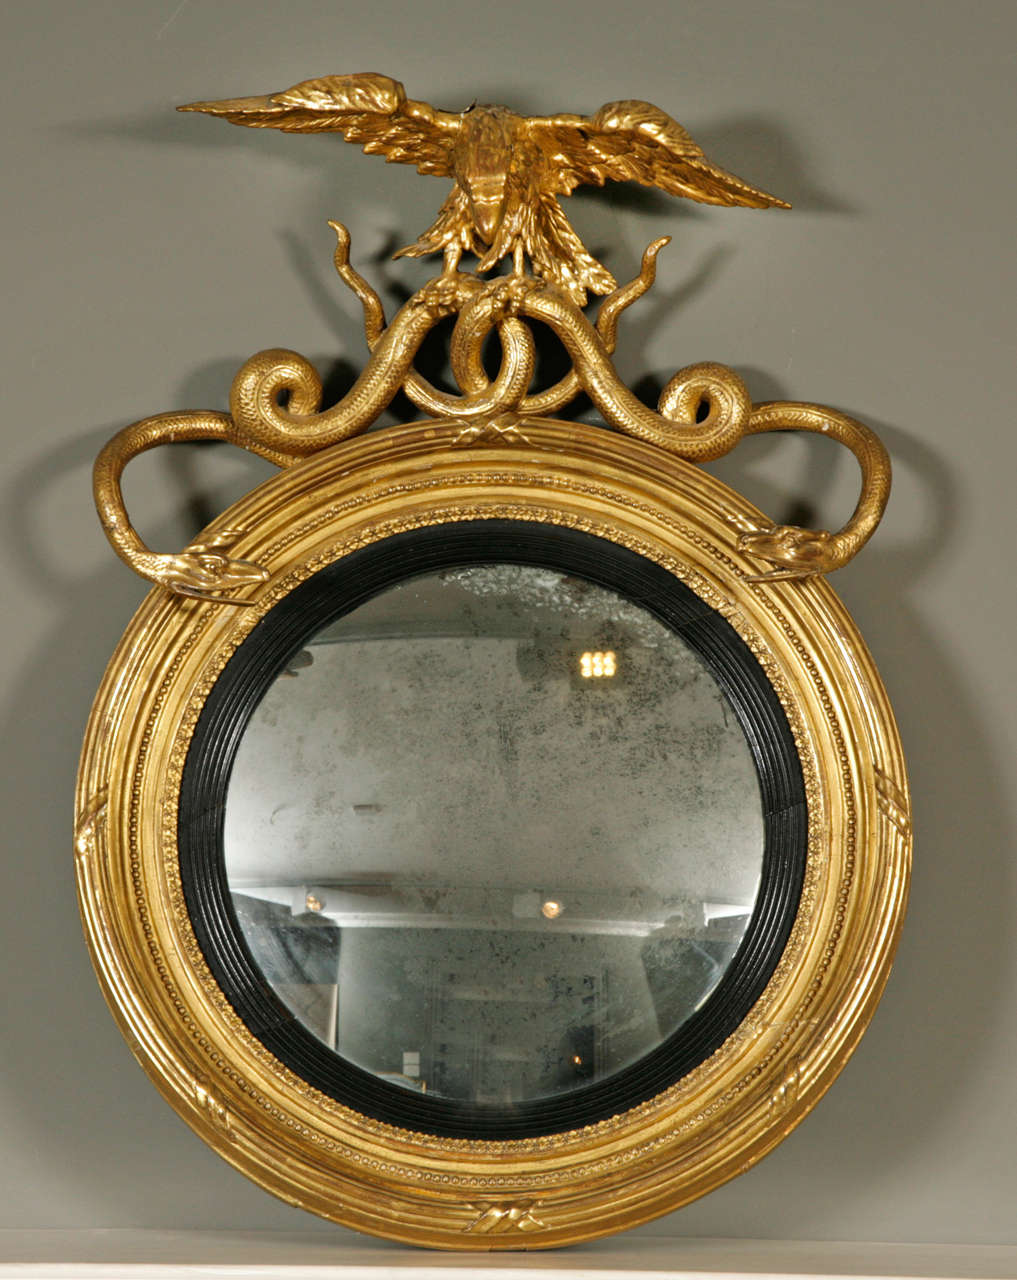 with eagle and intertwined serpent cresting above a well patinated plate within a reeded slip.